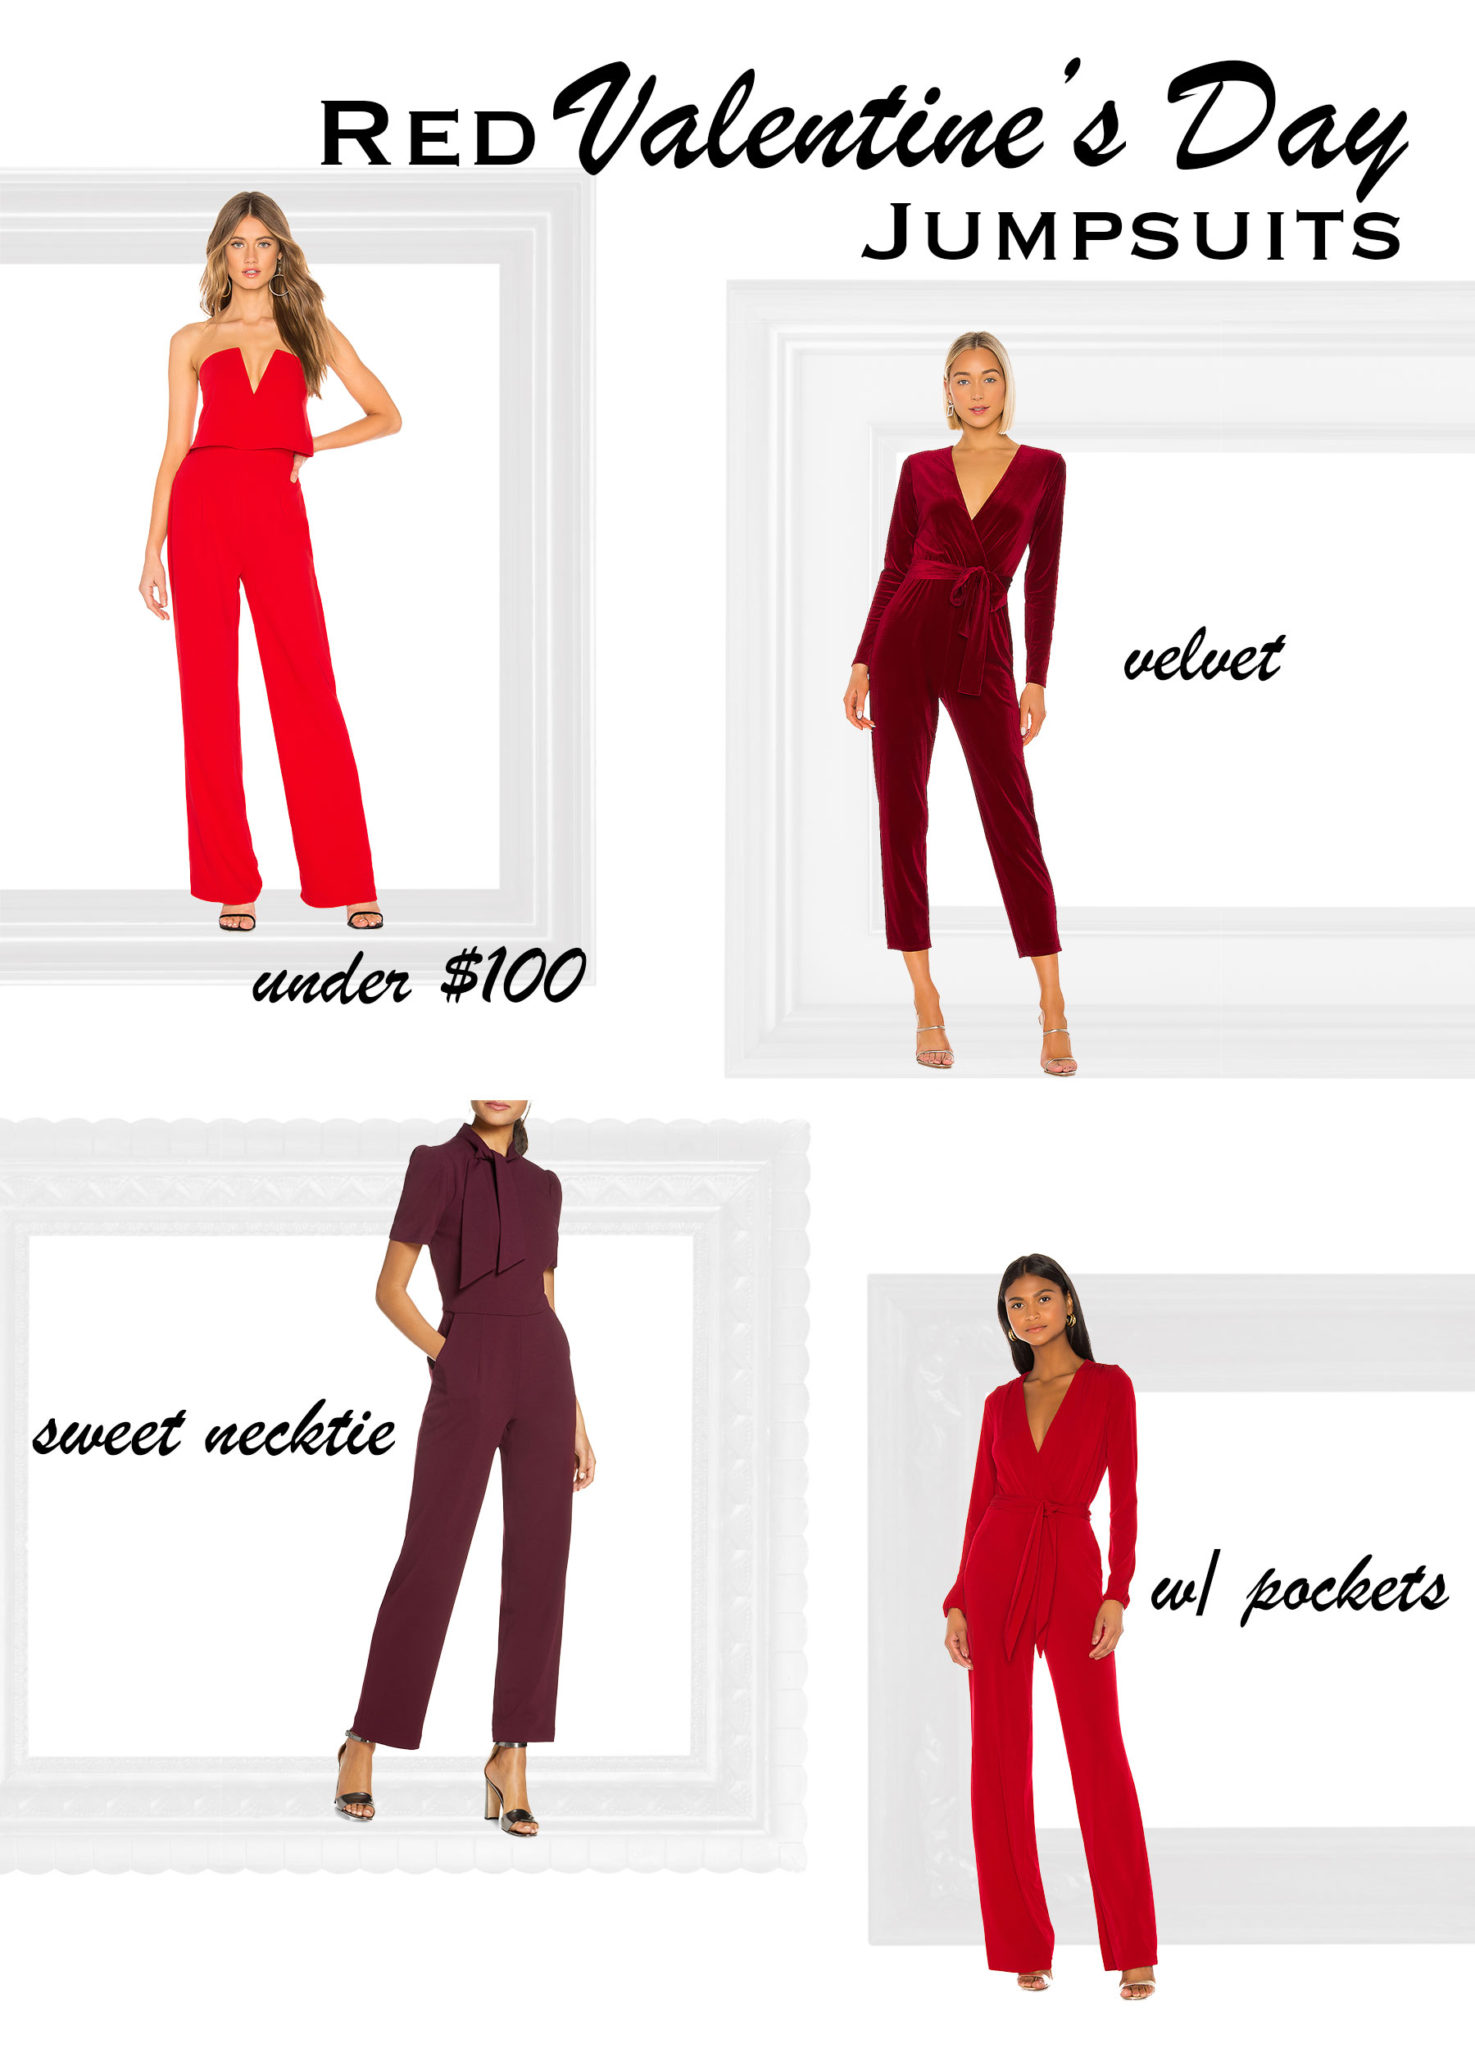 Red Jumpsuits for Valentine's Day